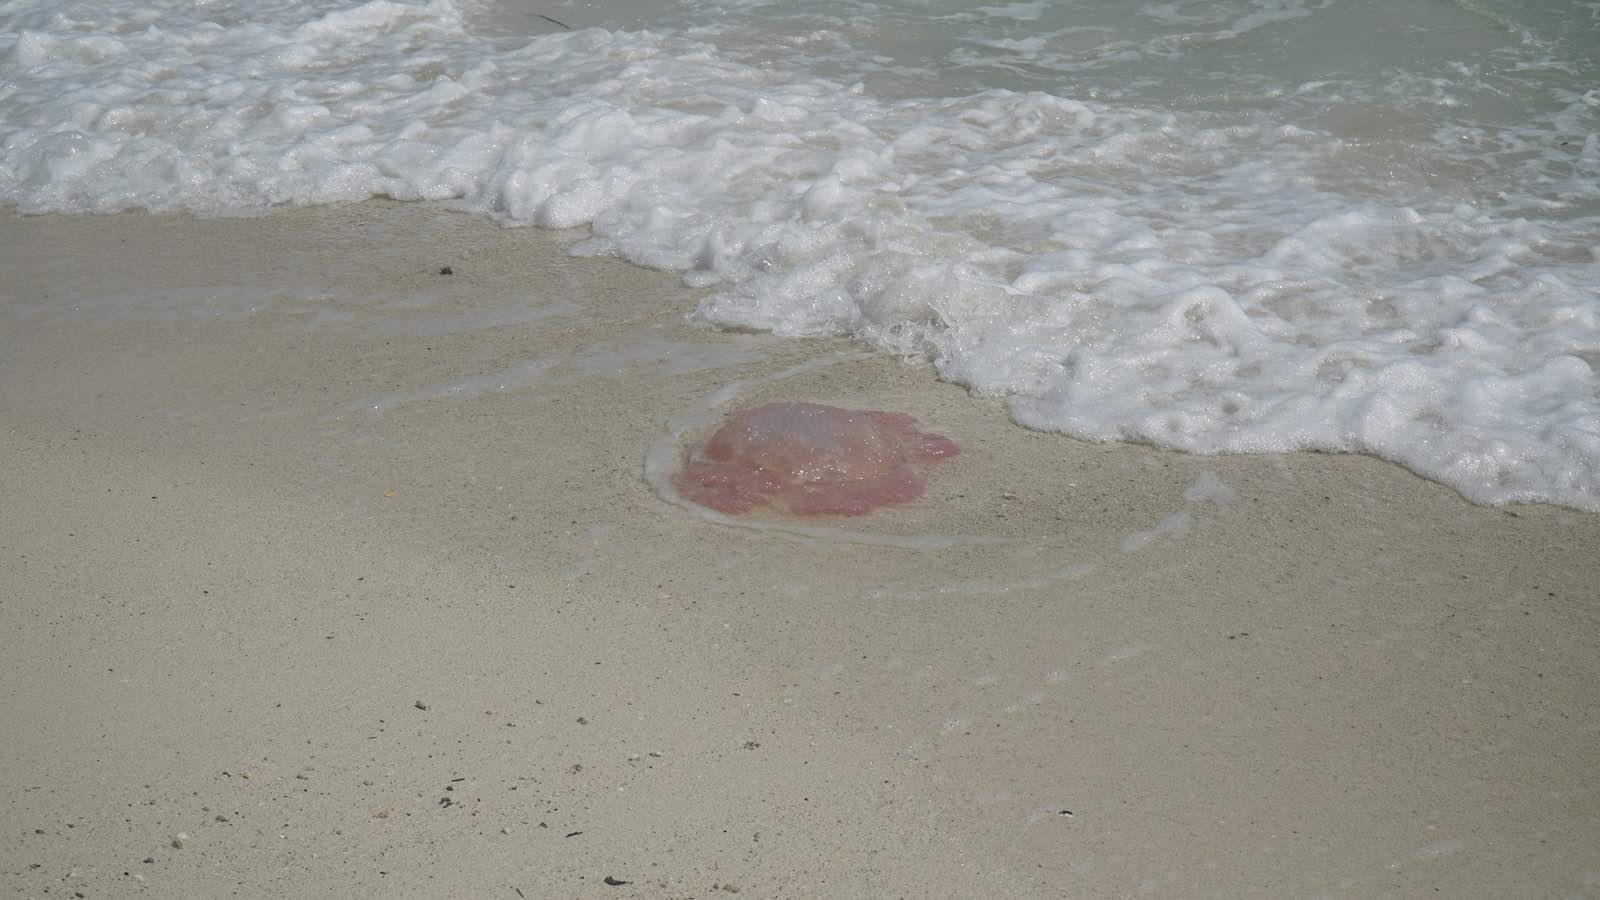 Walked along the little beach on the island and found some beached jellyfish and poked at them with a stick.